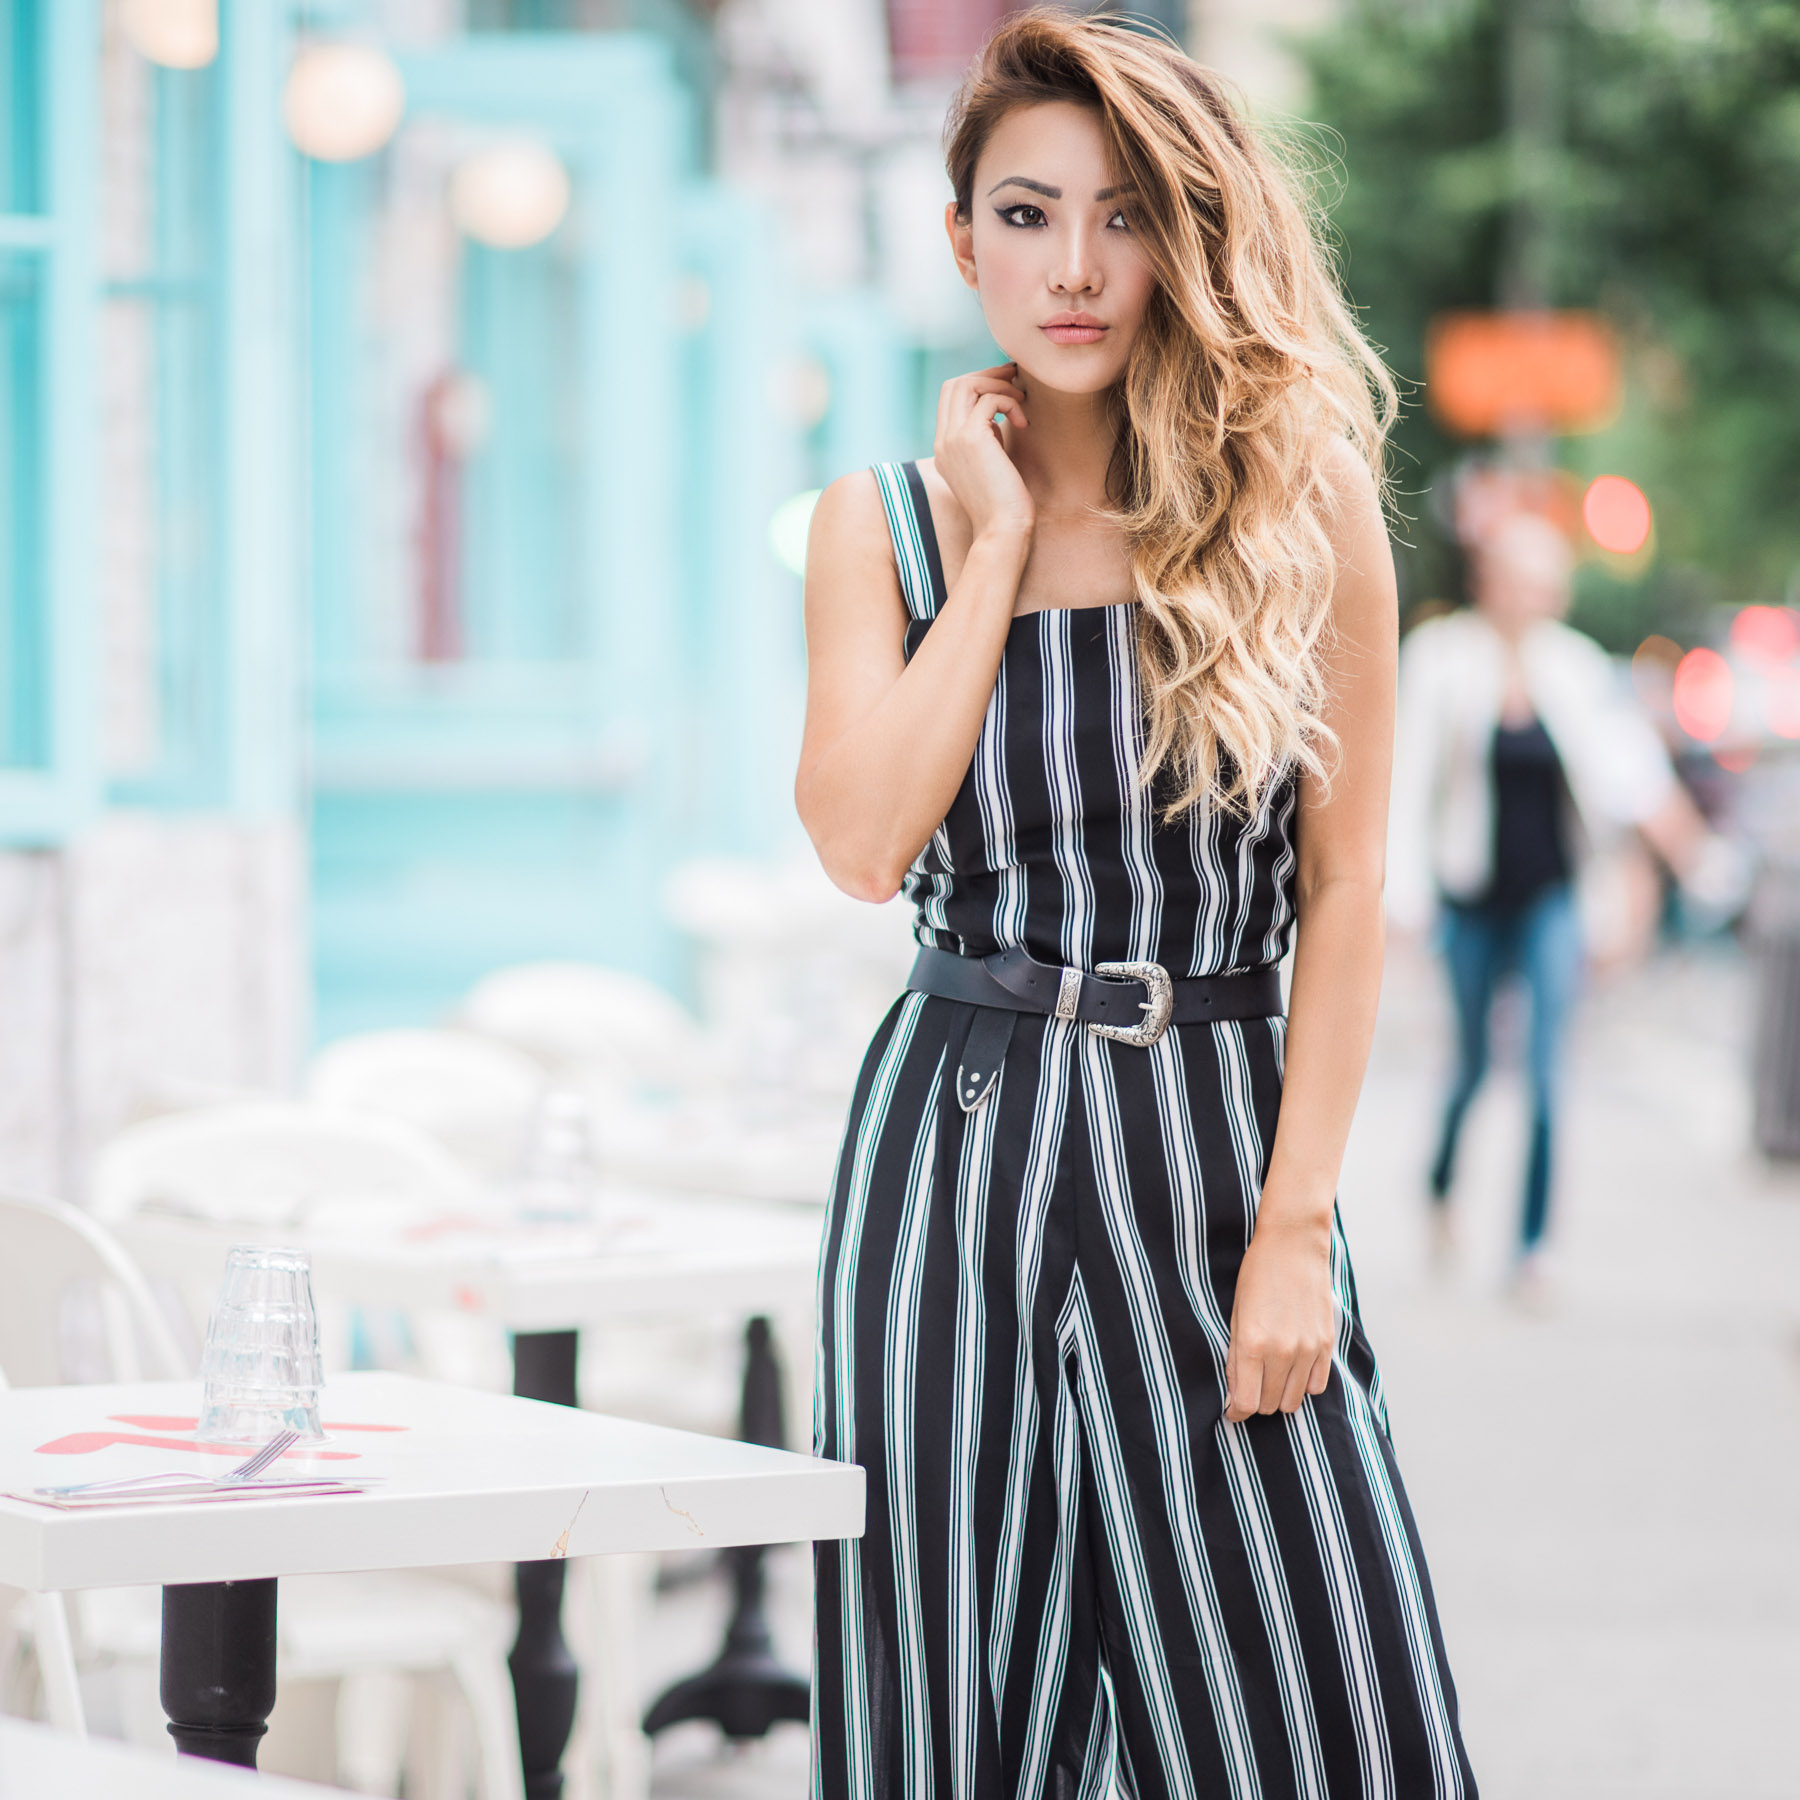 Jumpsuit - The 7 Key Pieces To Nail A Great Happy Hour Outfit // NotJessFashion.com